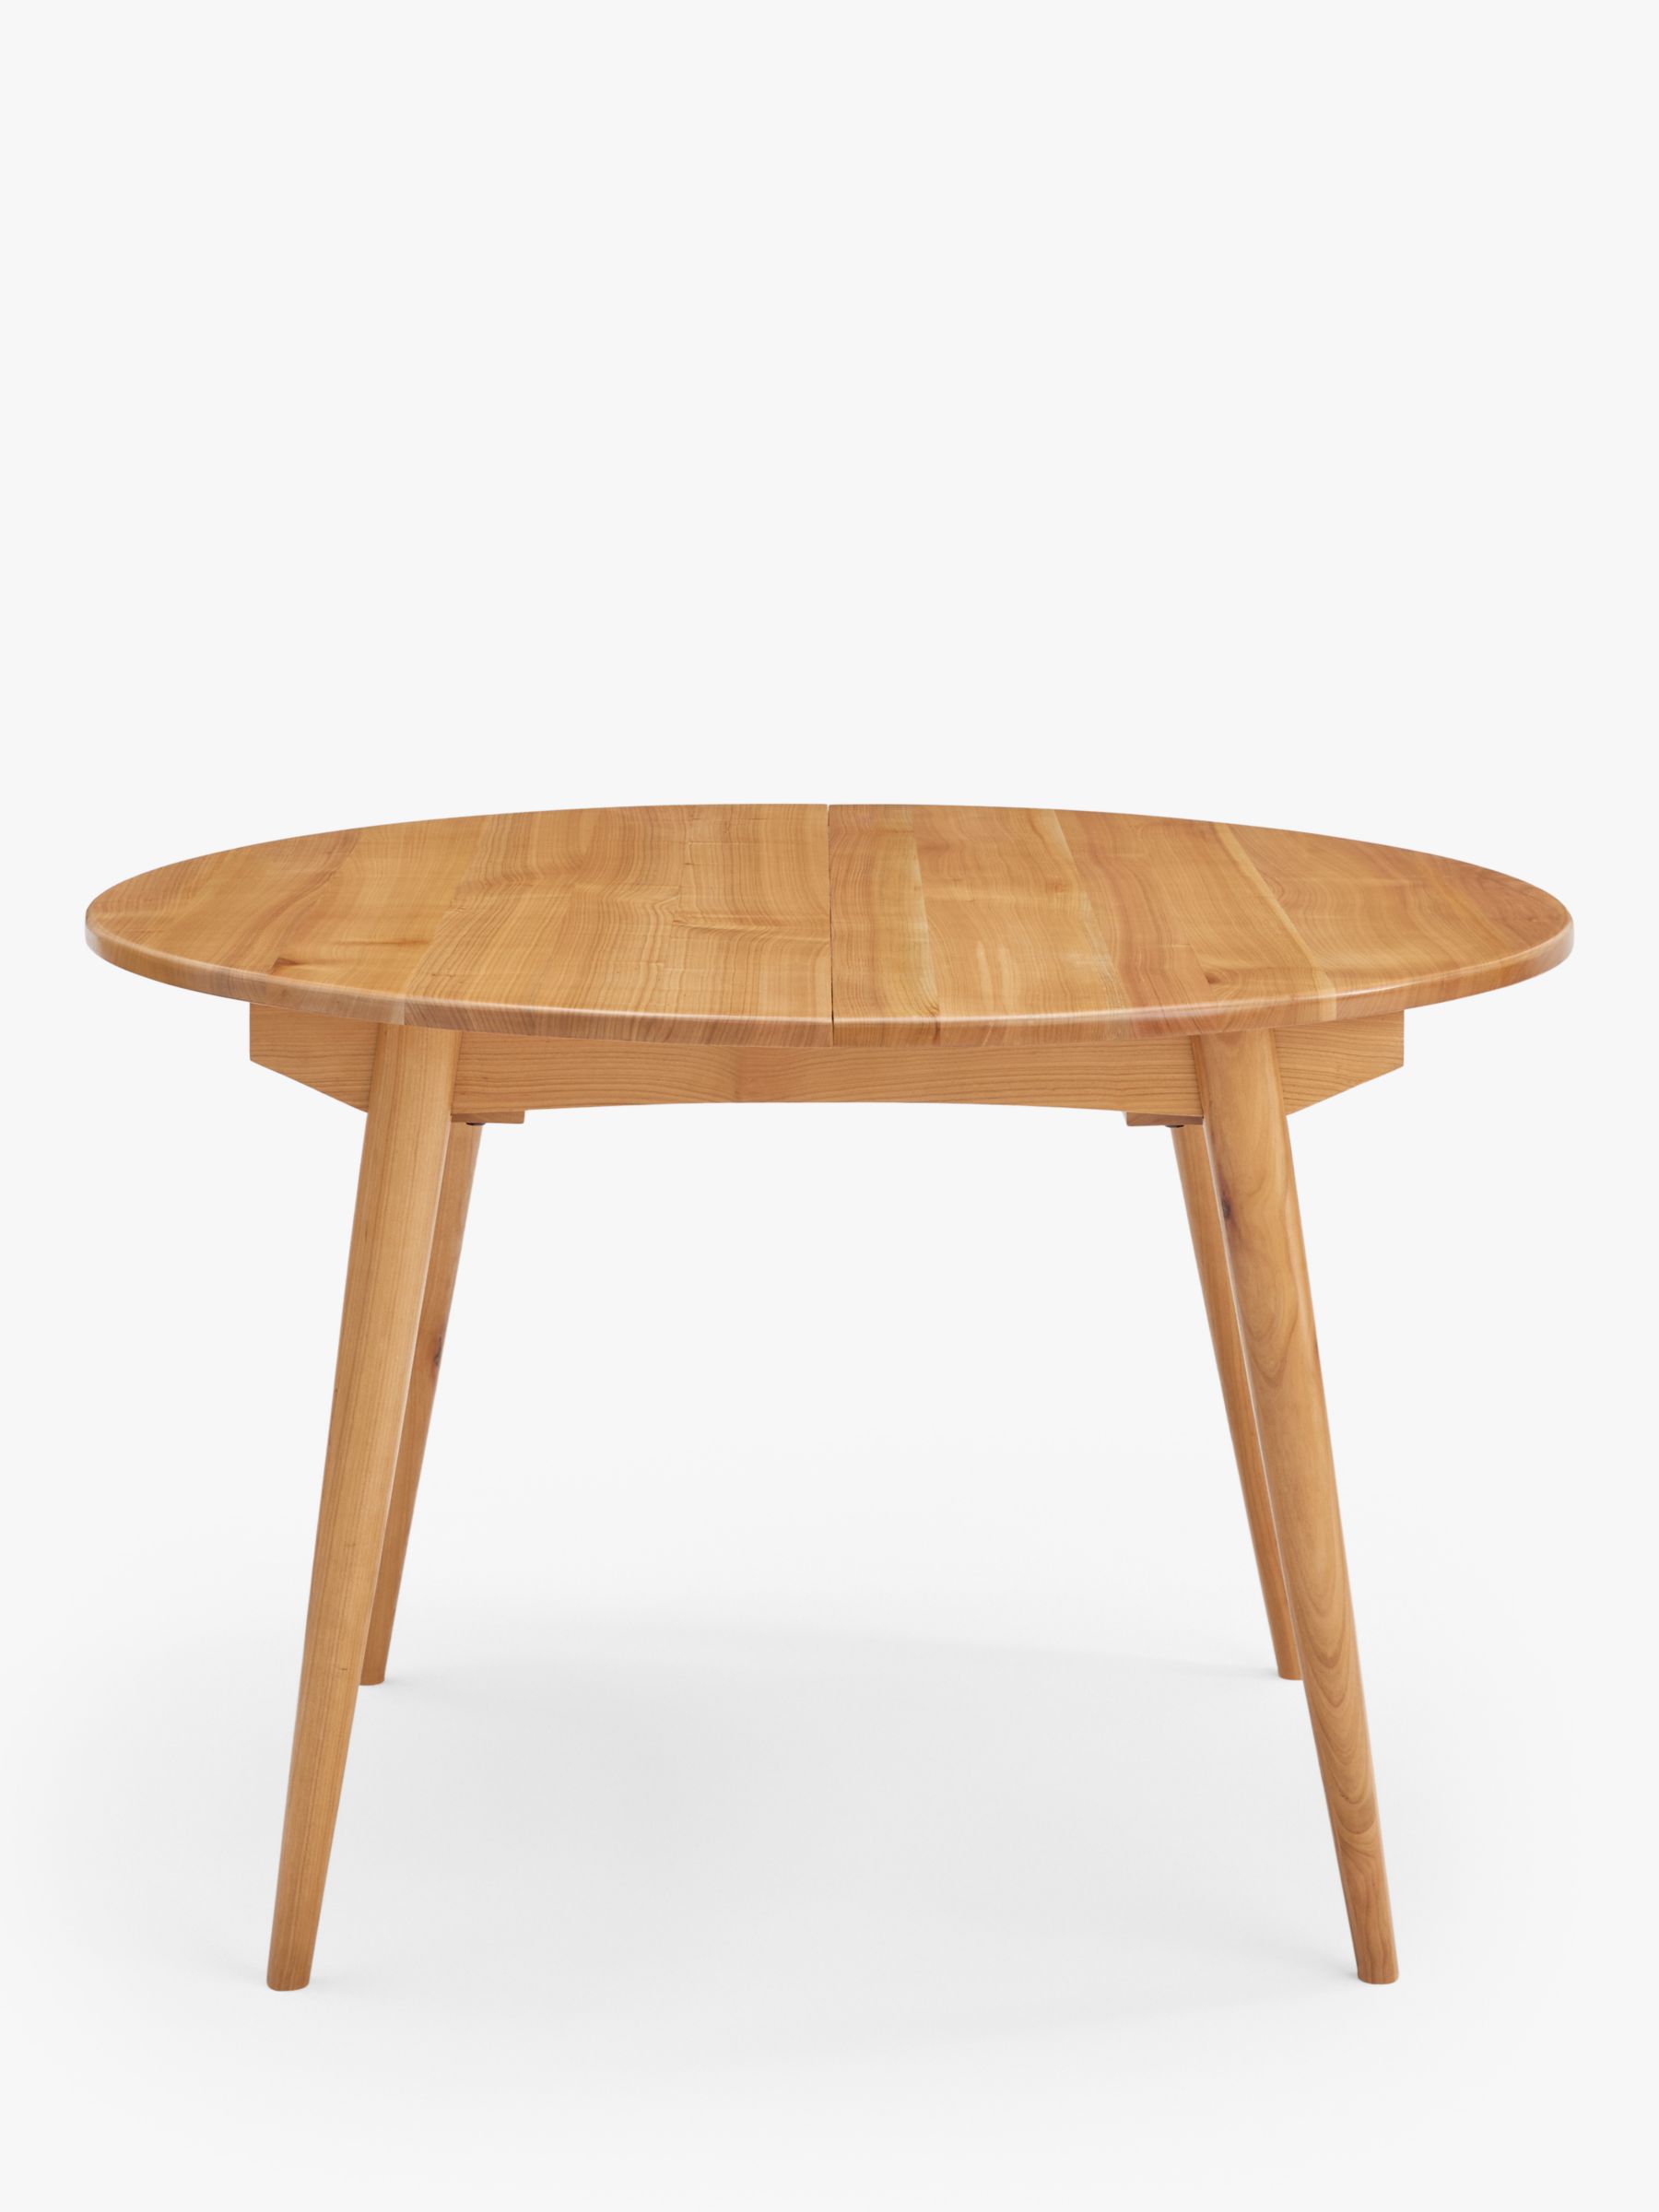 John Lewis Wycombe 4-6 seater Round Extending Dining Table, Cherrywood